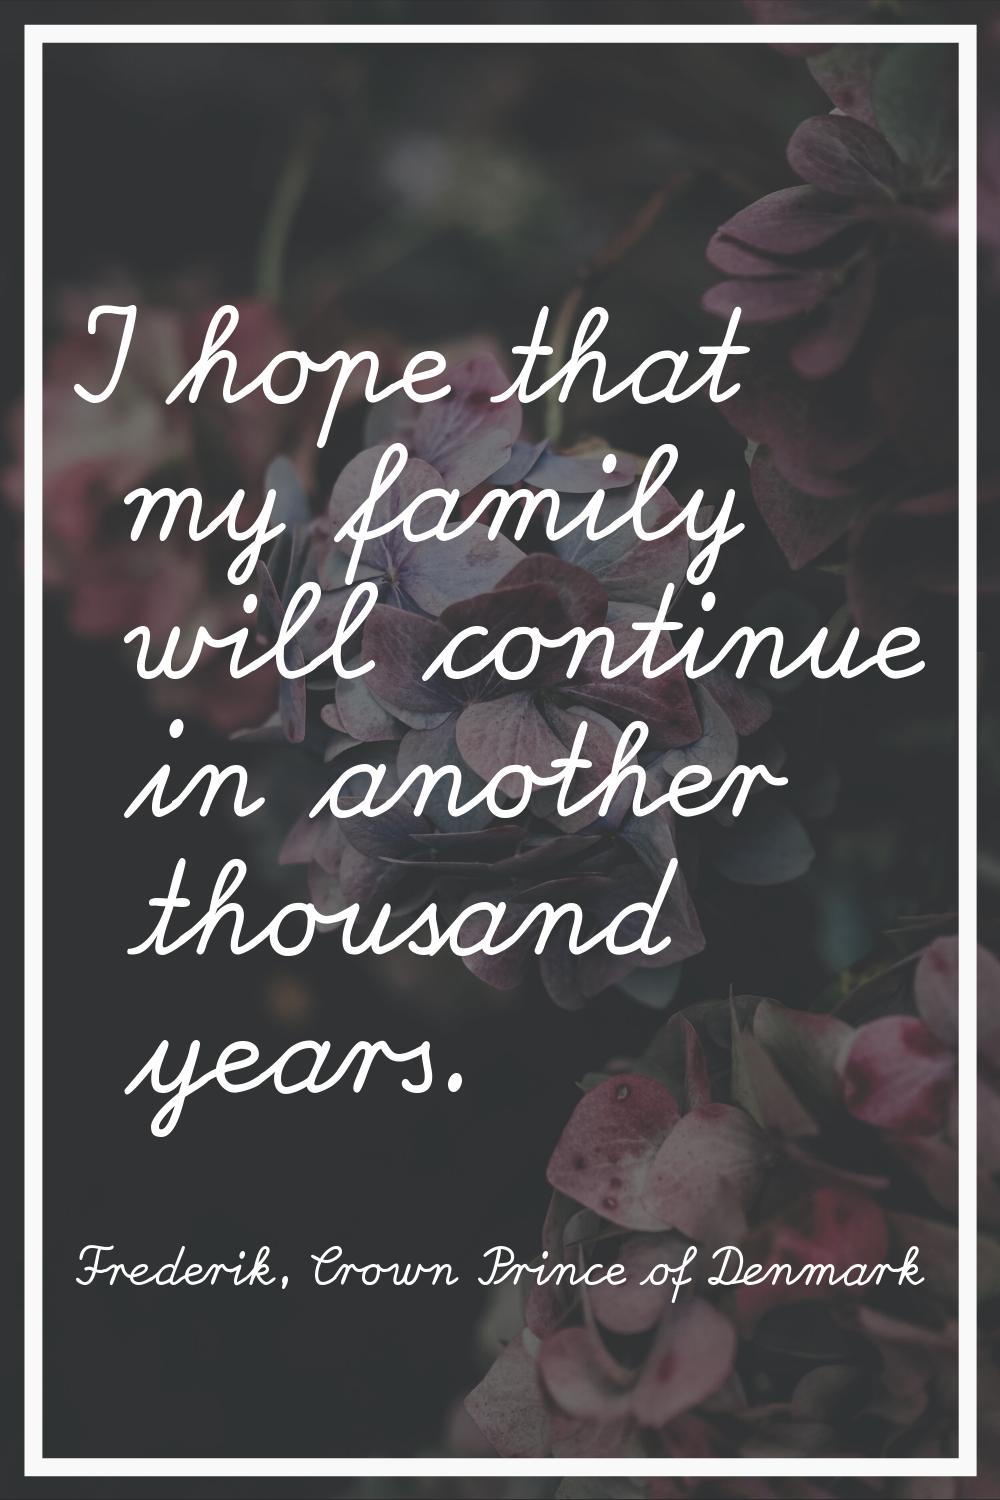 I hope that my family will continue in another thousand years.